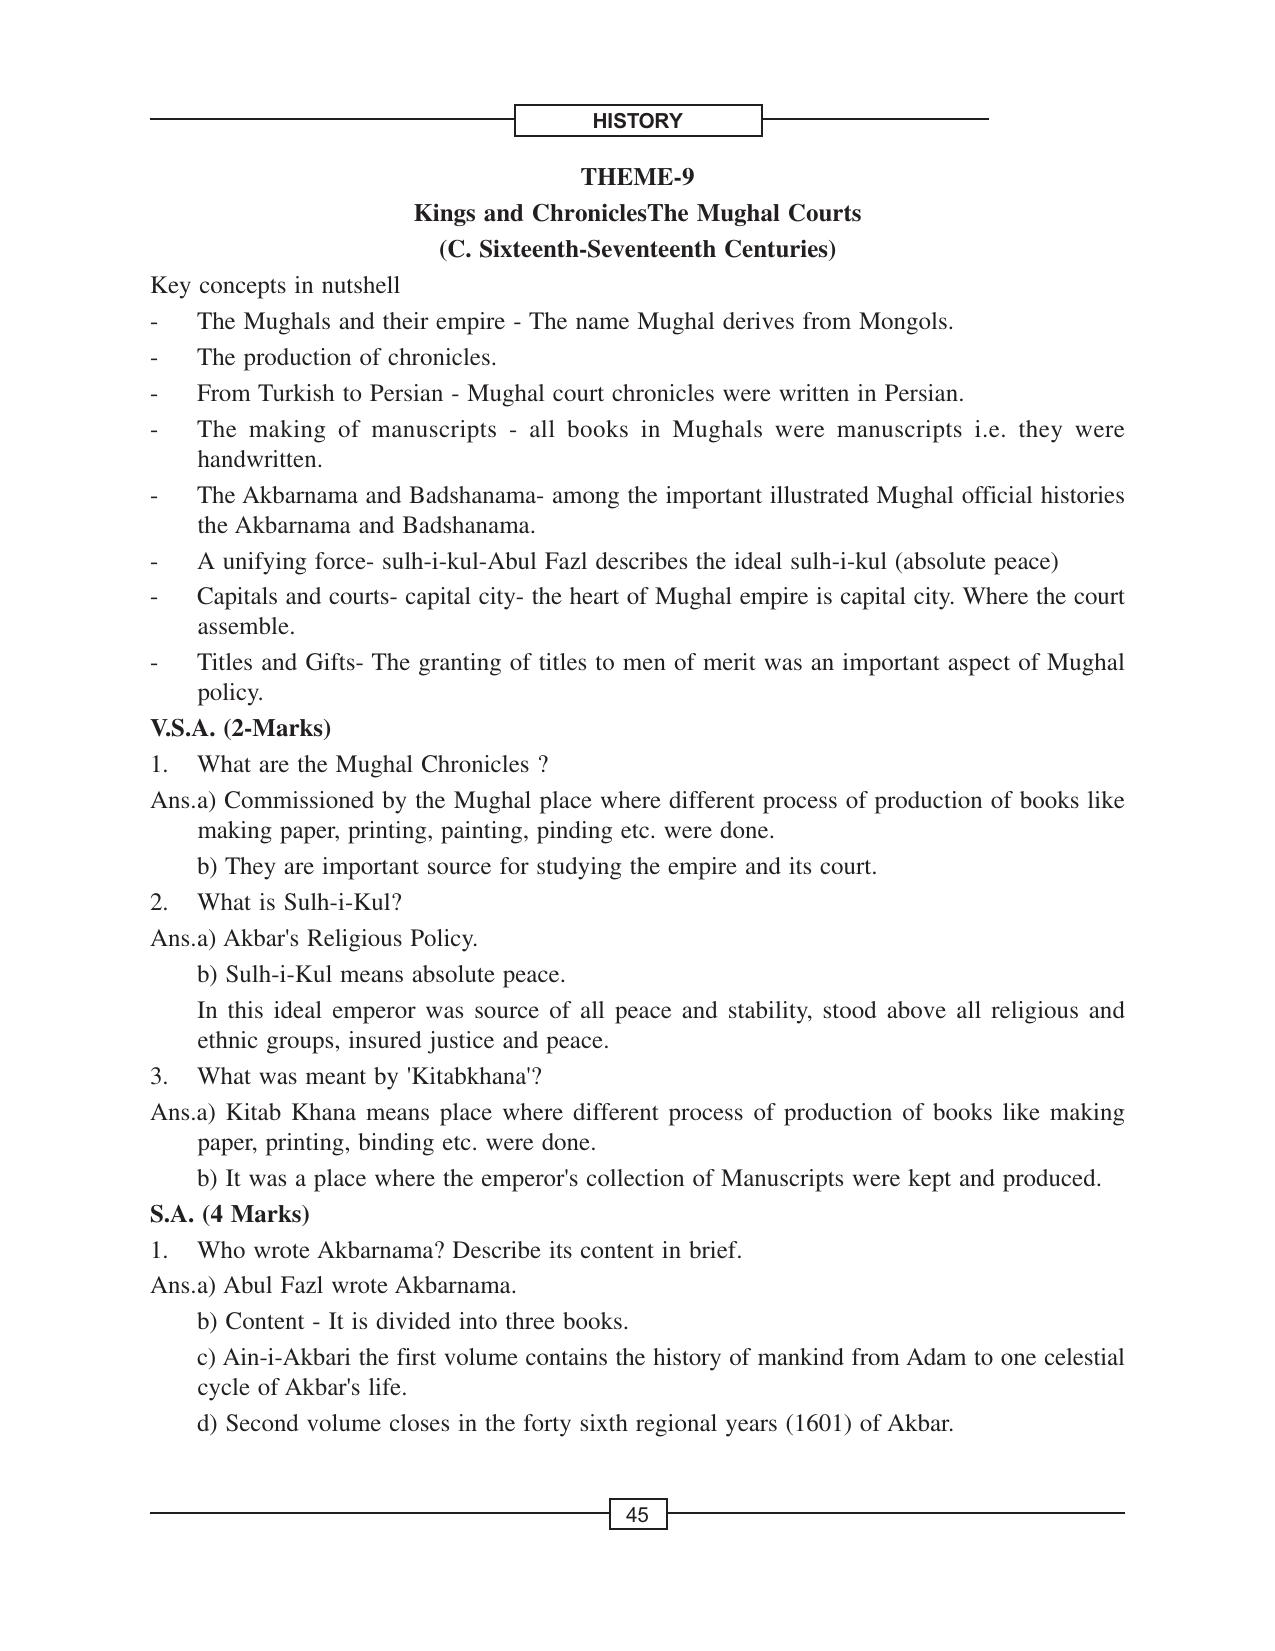 CBSE Class 12 History Kings Chronicles Mughal Courts - Page 1